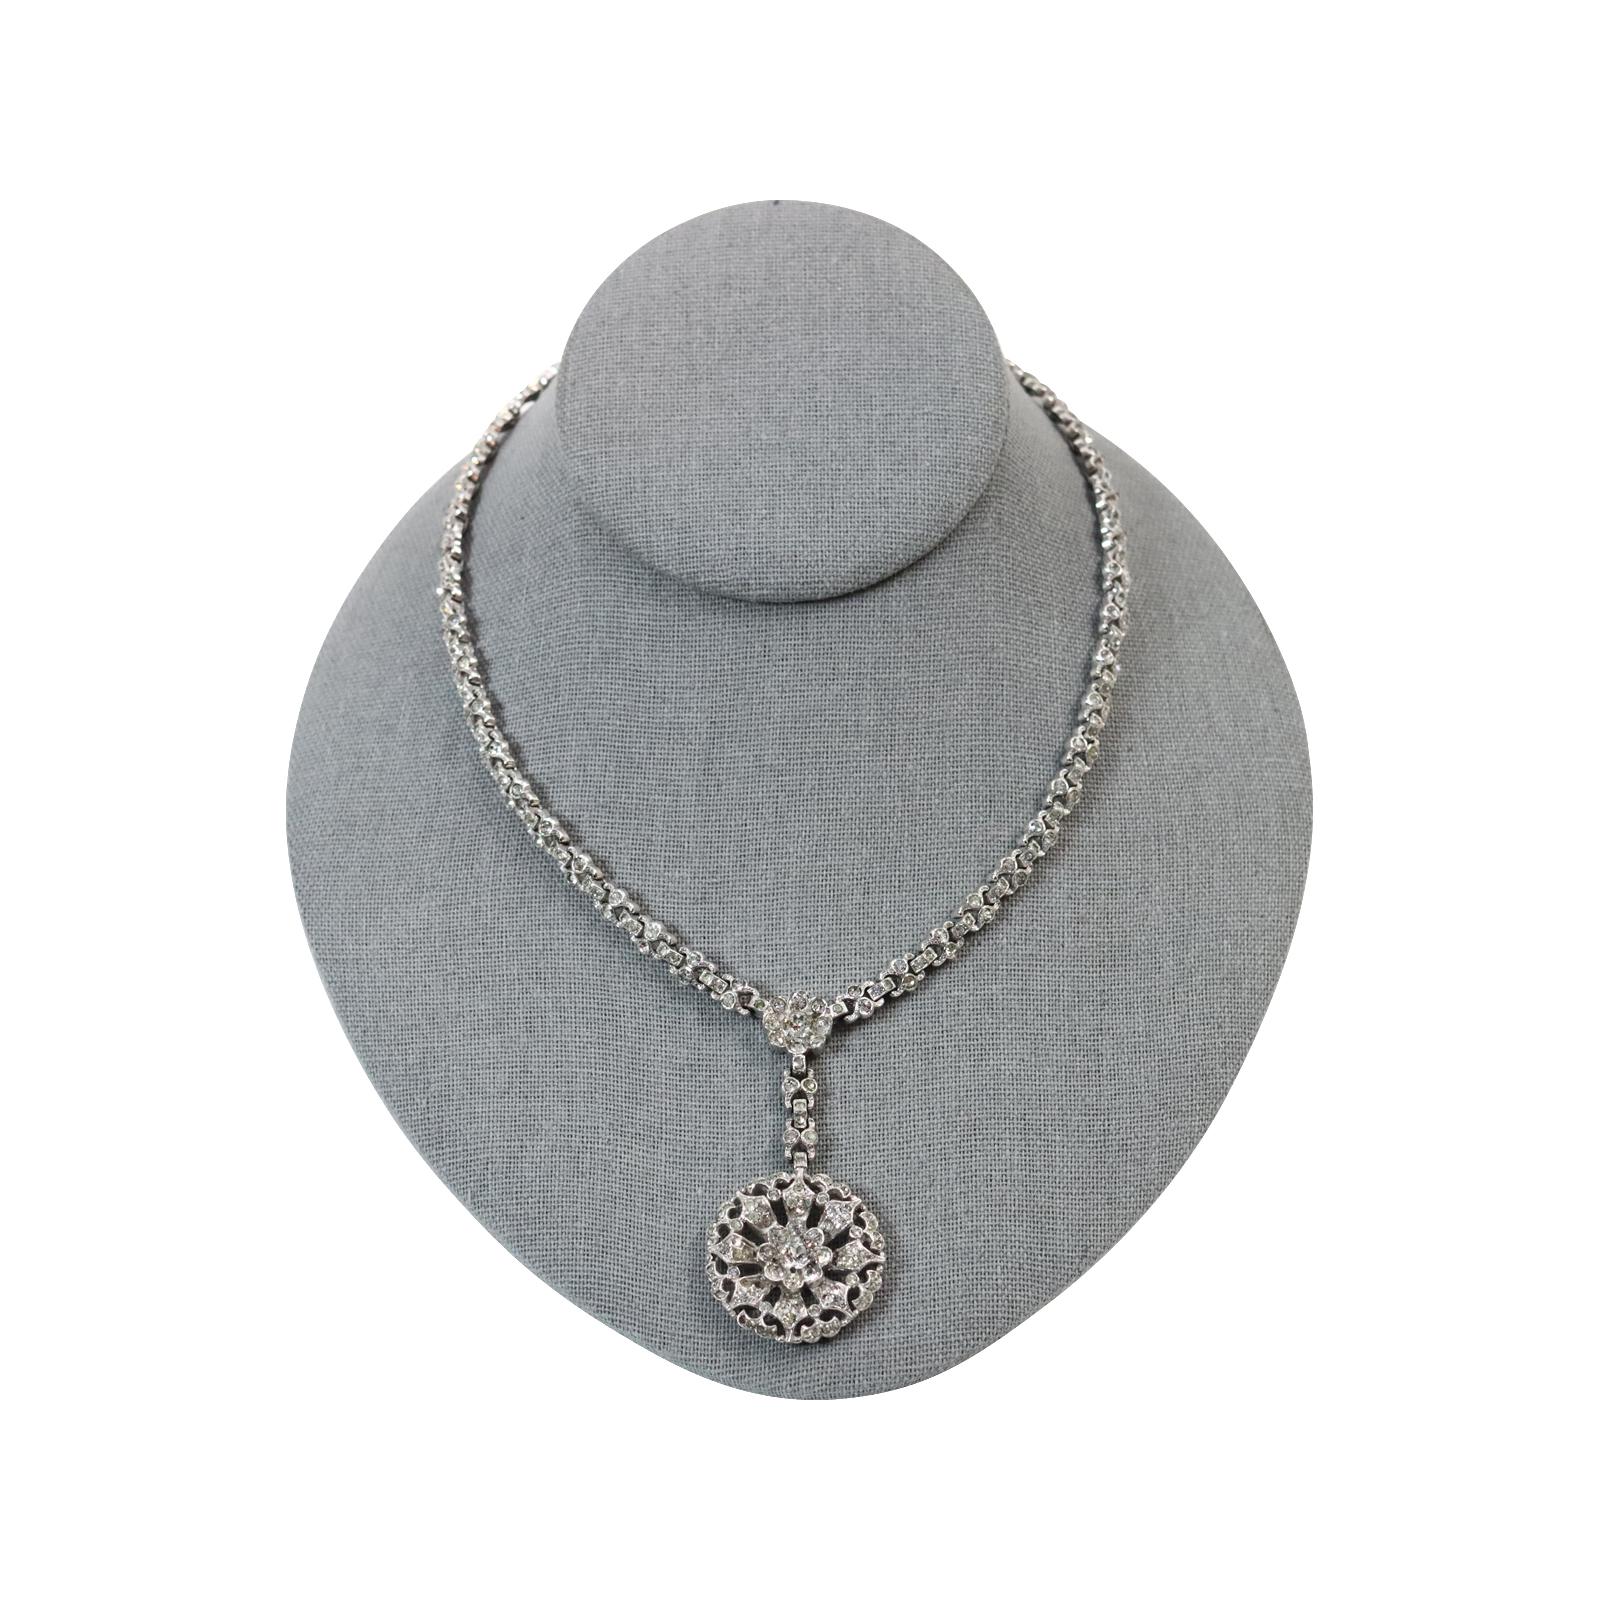 Vintage Alfred Phillipe Trifari  Drop Necklace Circa Circa 1940's. This necklace is so magnificent.  It looks like fine jewelry and is preserved so well.  It is truly magical. Small round pieces and pave in a pattern around the neck and then comes